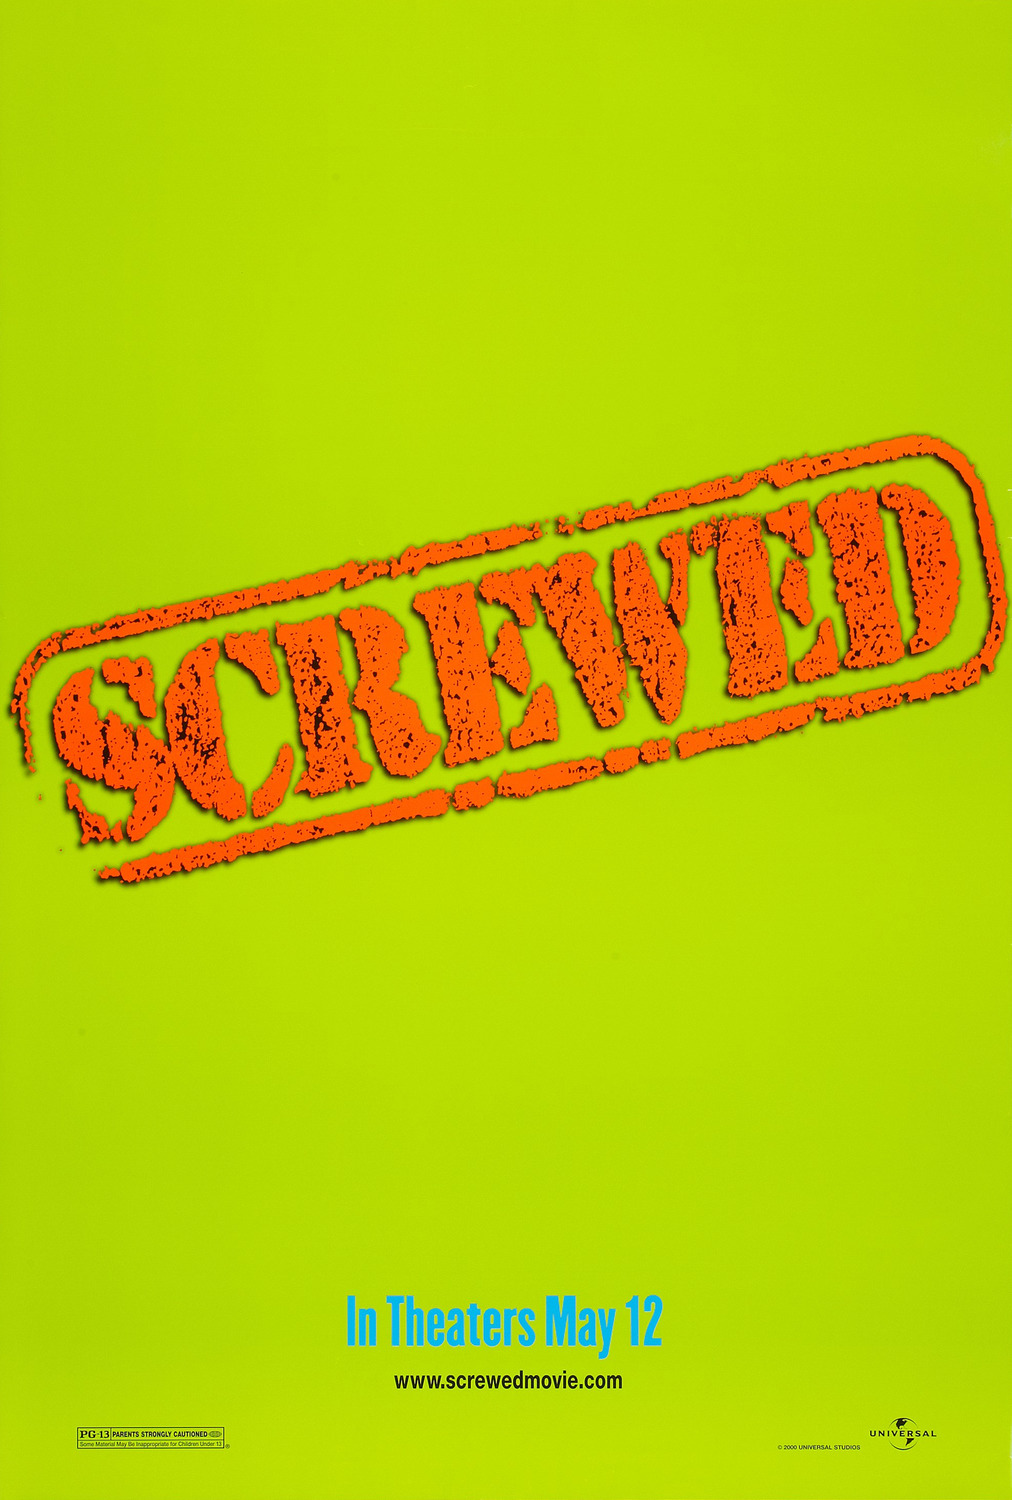 Extra Large Movie Poster Image for Screwed (#2 of 2)